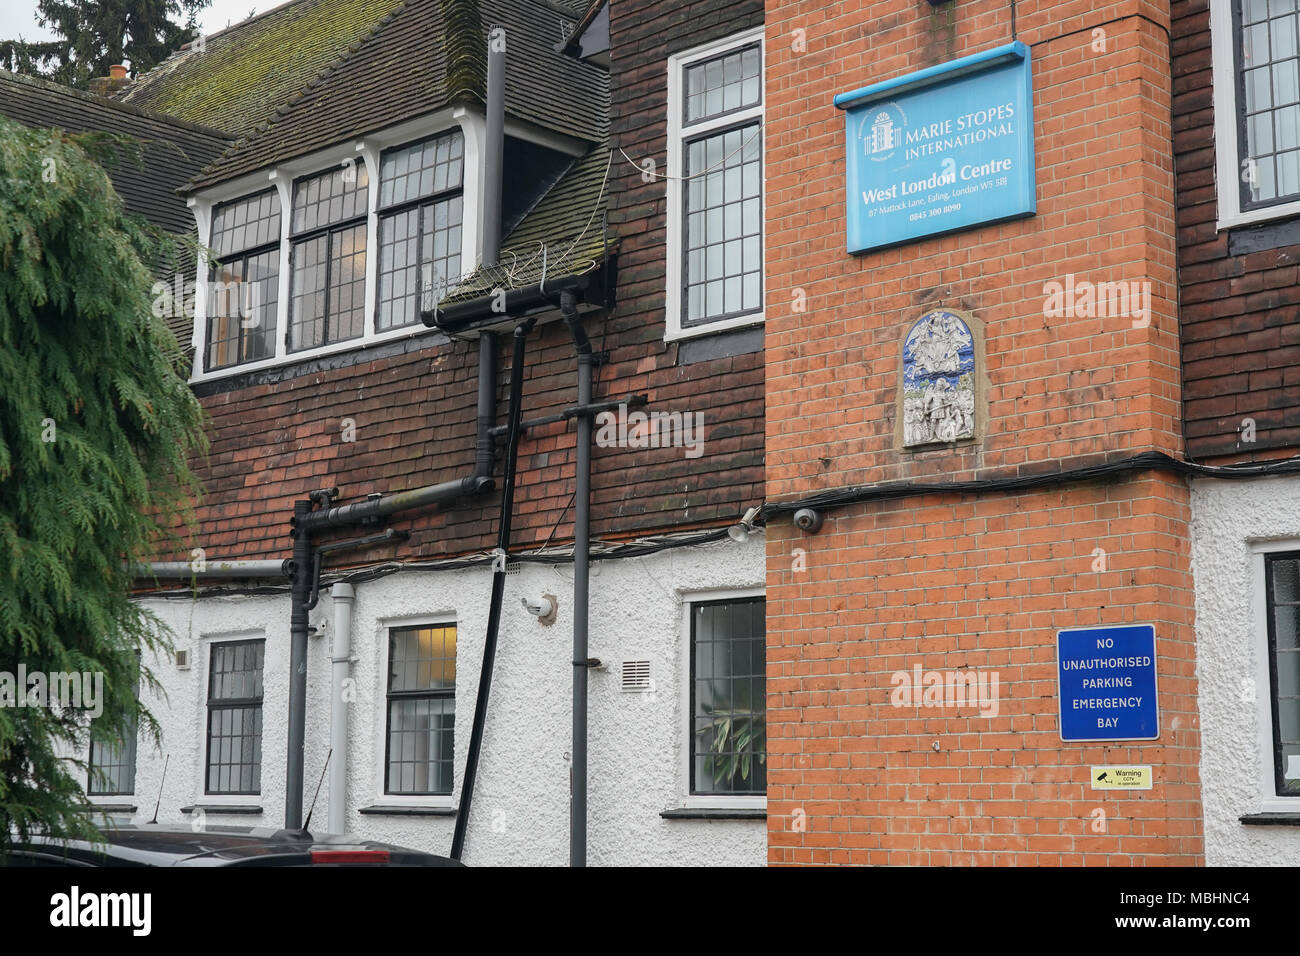 London, UIK. 11th April 2018. The Marie Stopes Parkview clinic in Mattock Lane, Ealing, London, after Ealing Council's decision to impose a ban on protests outside the clinic. Photo date: Wednesday, April 11, 2018. Credit: Roger Garfield/Alamy Live News Stock Photo